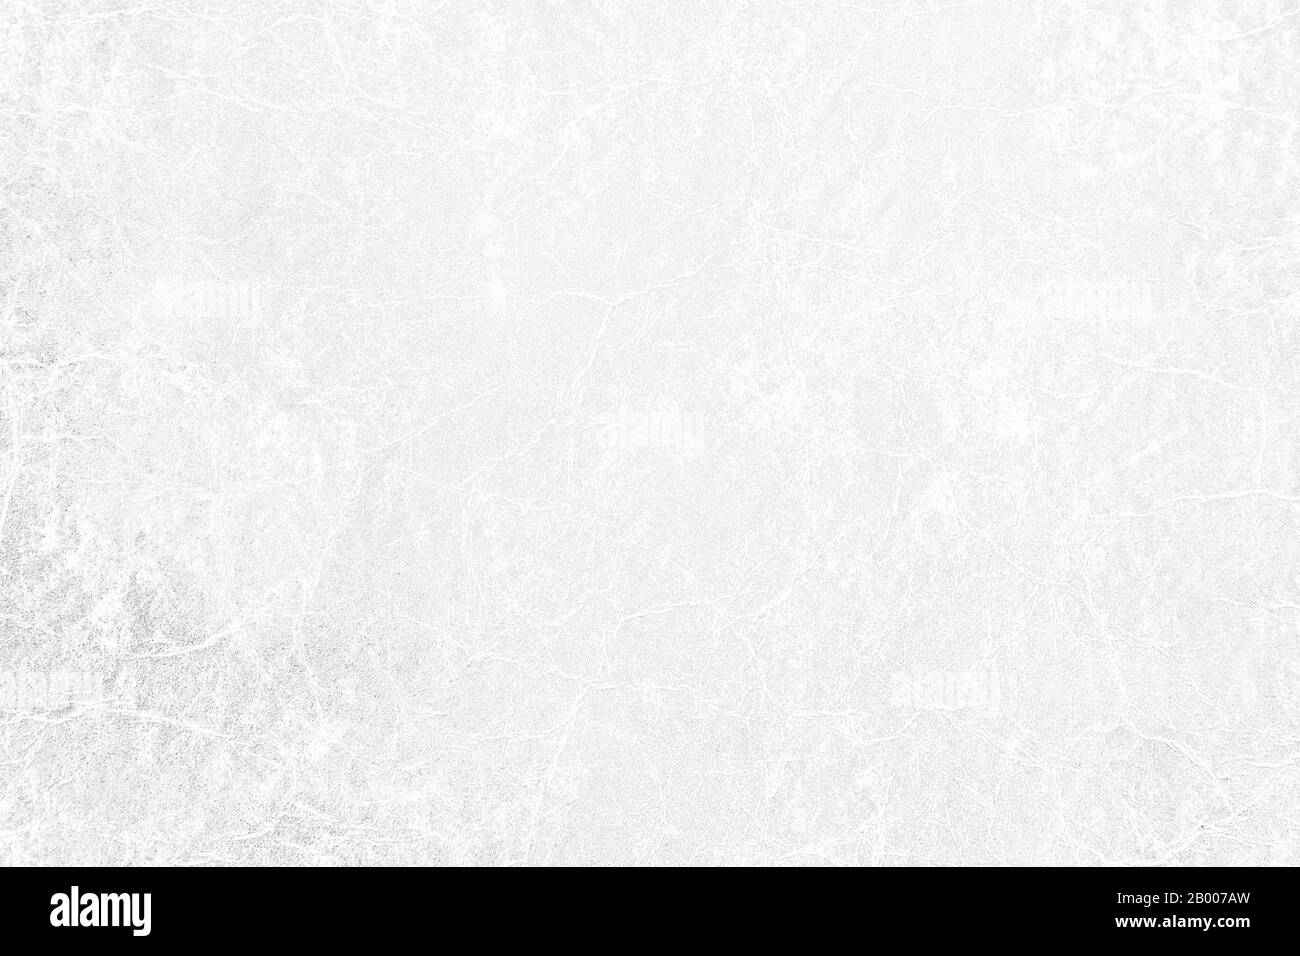 White leather texture background grunge background ,Leather detail Space  for Text Composition art image, website, magazine or advertising design  Stock Photo - Alamy